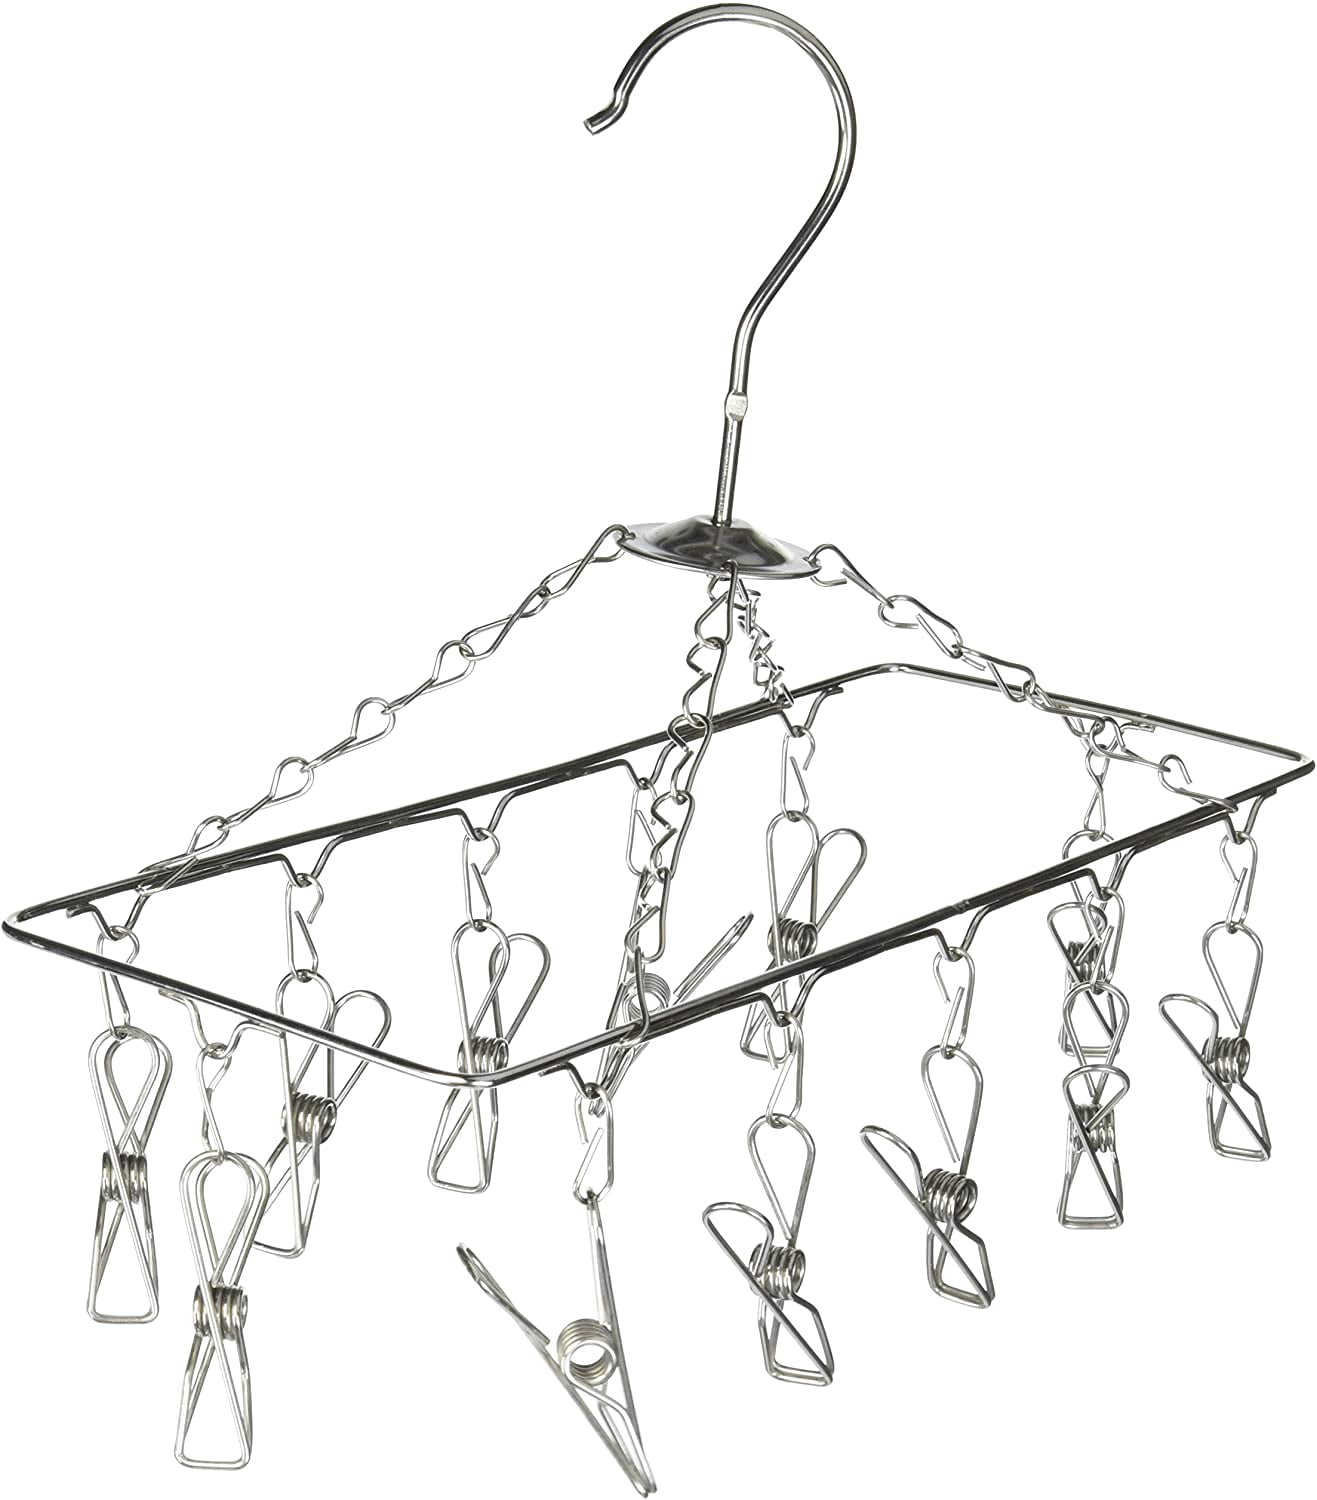 Chrome Honey-Can-Do DRY-01102 Clothes Drying Hanger Rack with 12 Clips 